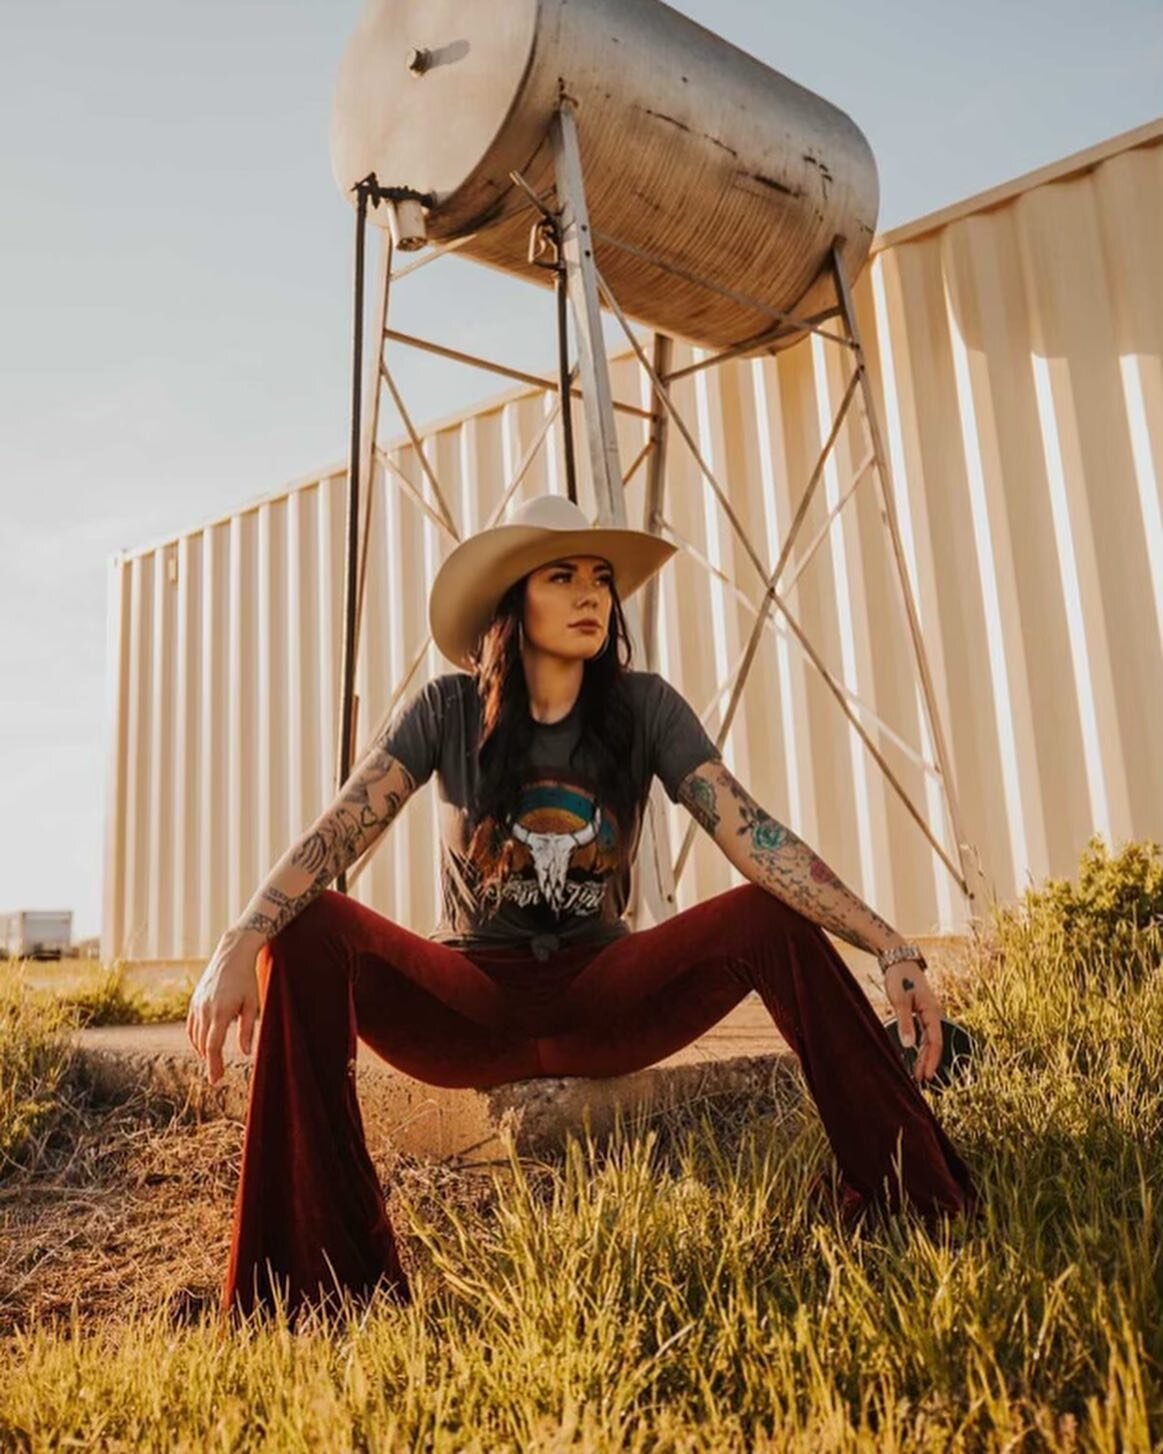 Is your fashion style sassy, classy, &amp; a bit bad-assy?! 😎

If so, you will love following this western boutique @rodeoqueenofhearts 🖤 We are in love with all their new arrivals! 🤠